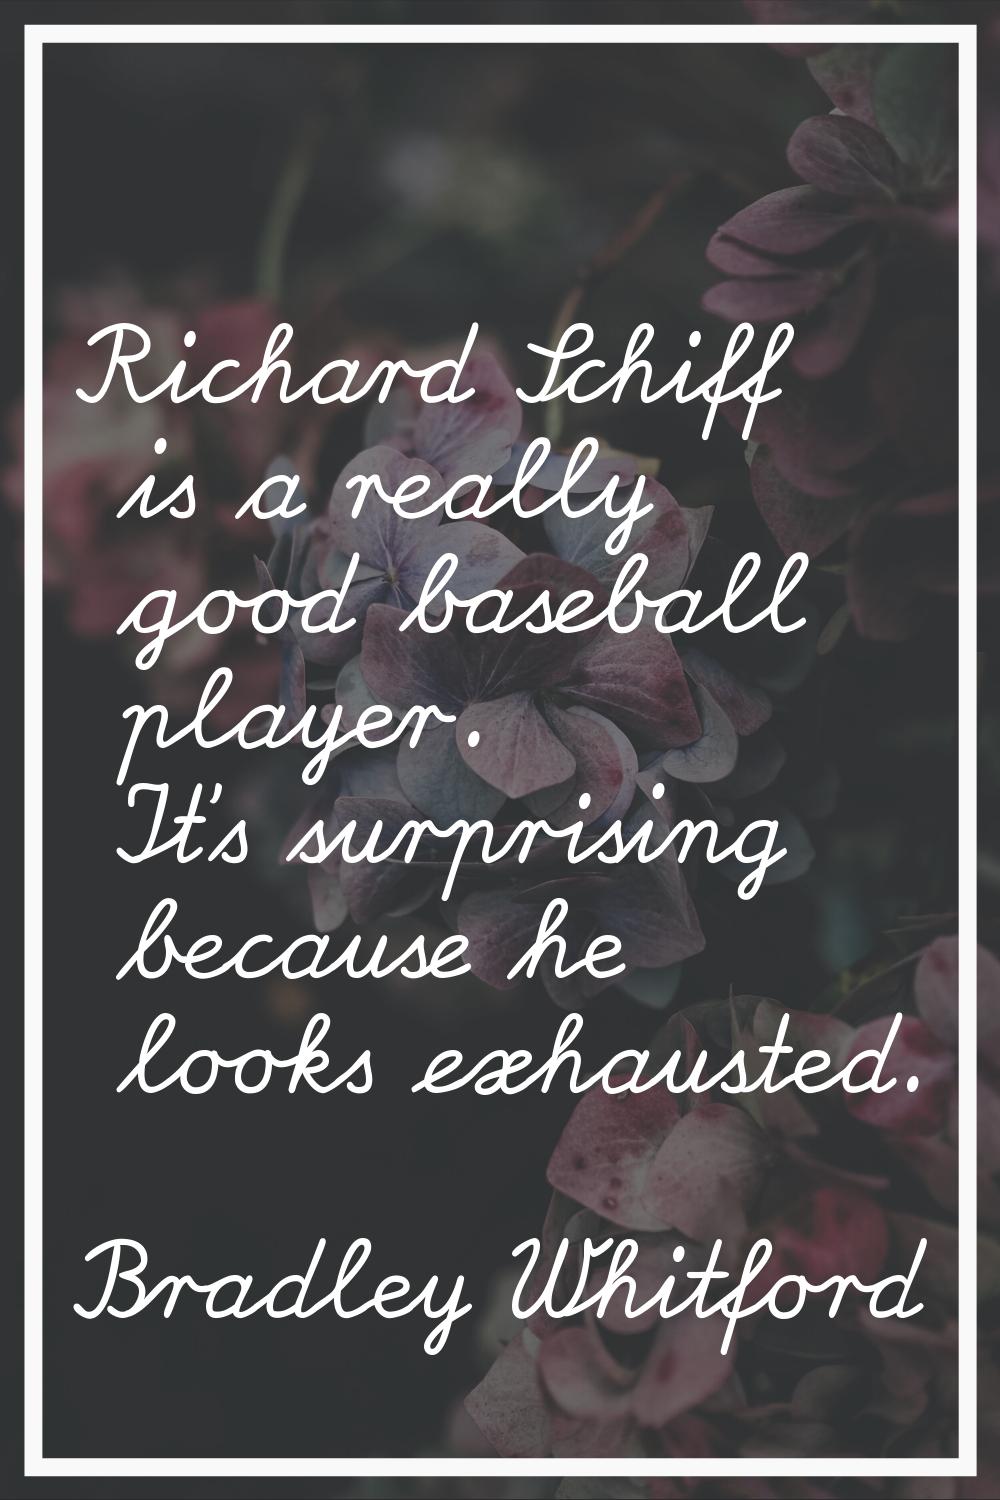 Richard Schiff is a really good baseball player. It's surprising because he looks exhausted.